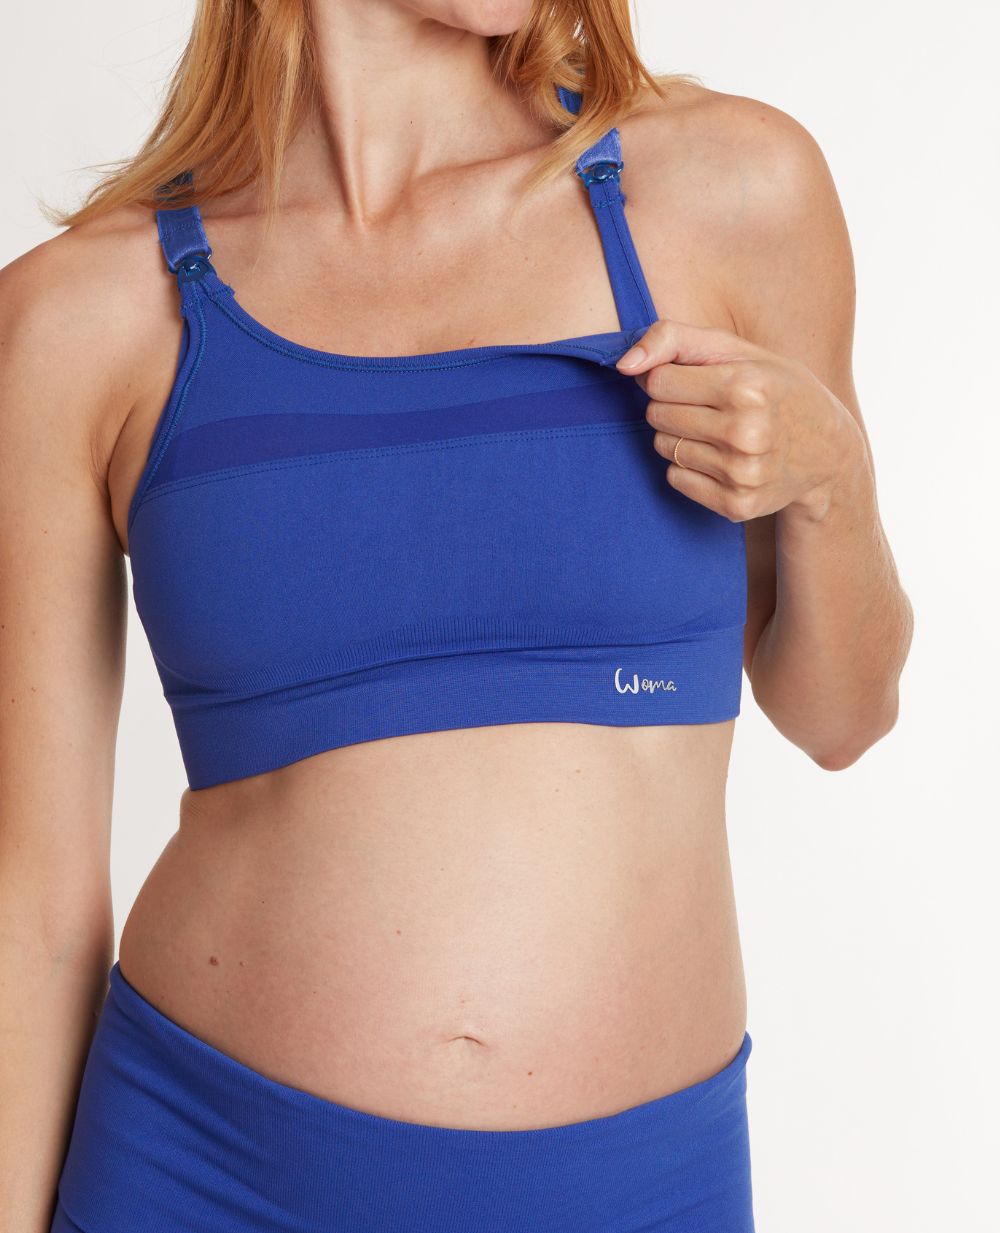 Woma electric blue maternity and nursing sports bra